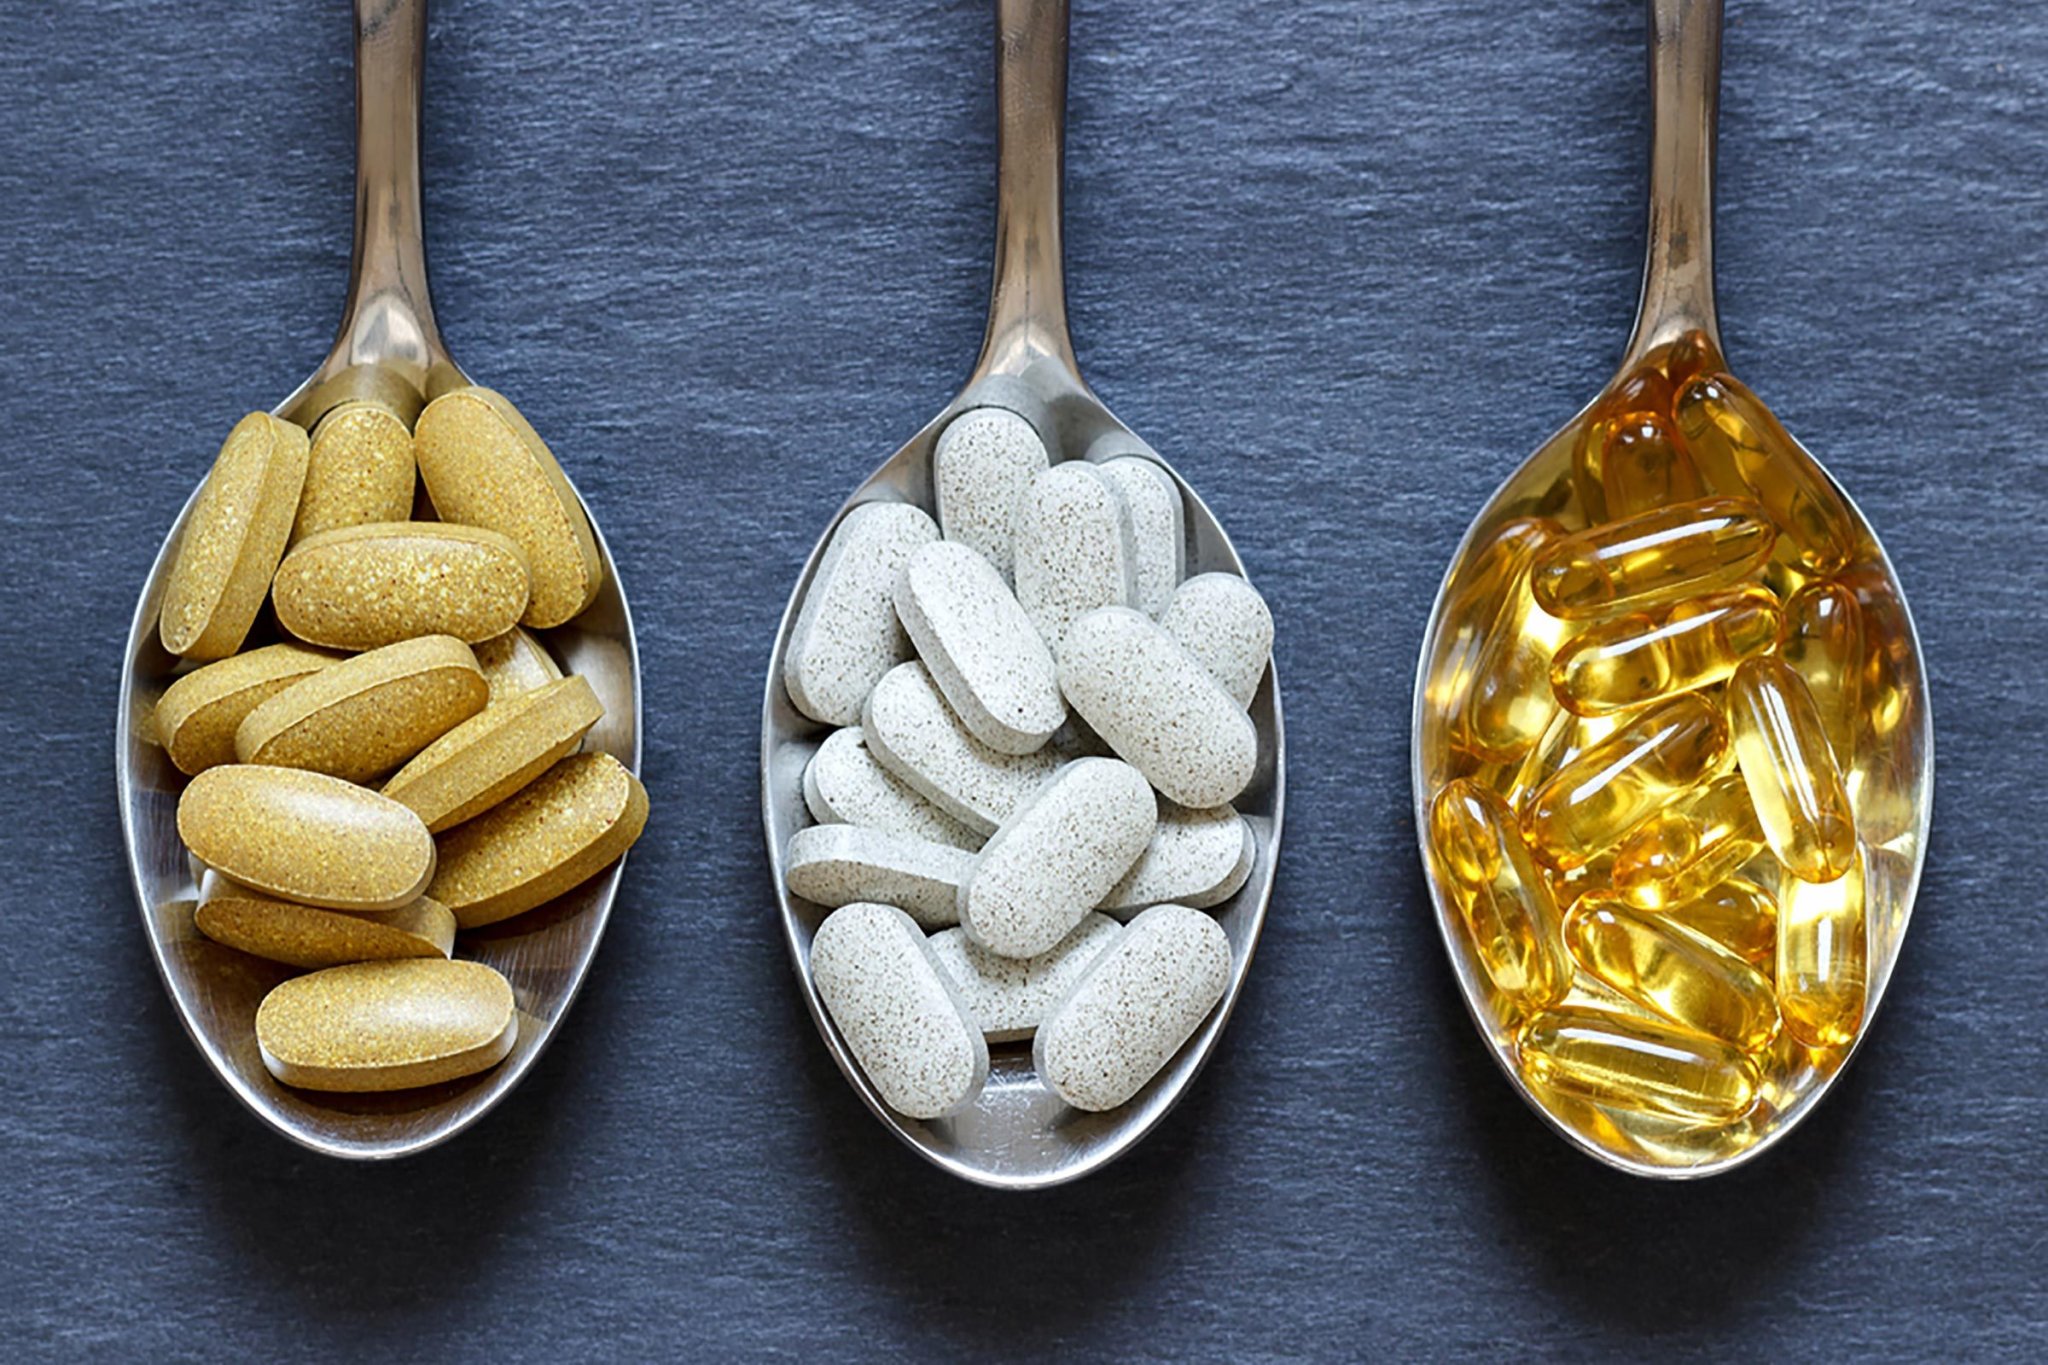 5 Vitamin Myths You Have to Stop Believing—and 1 Vitamin You Actually Do Need